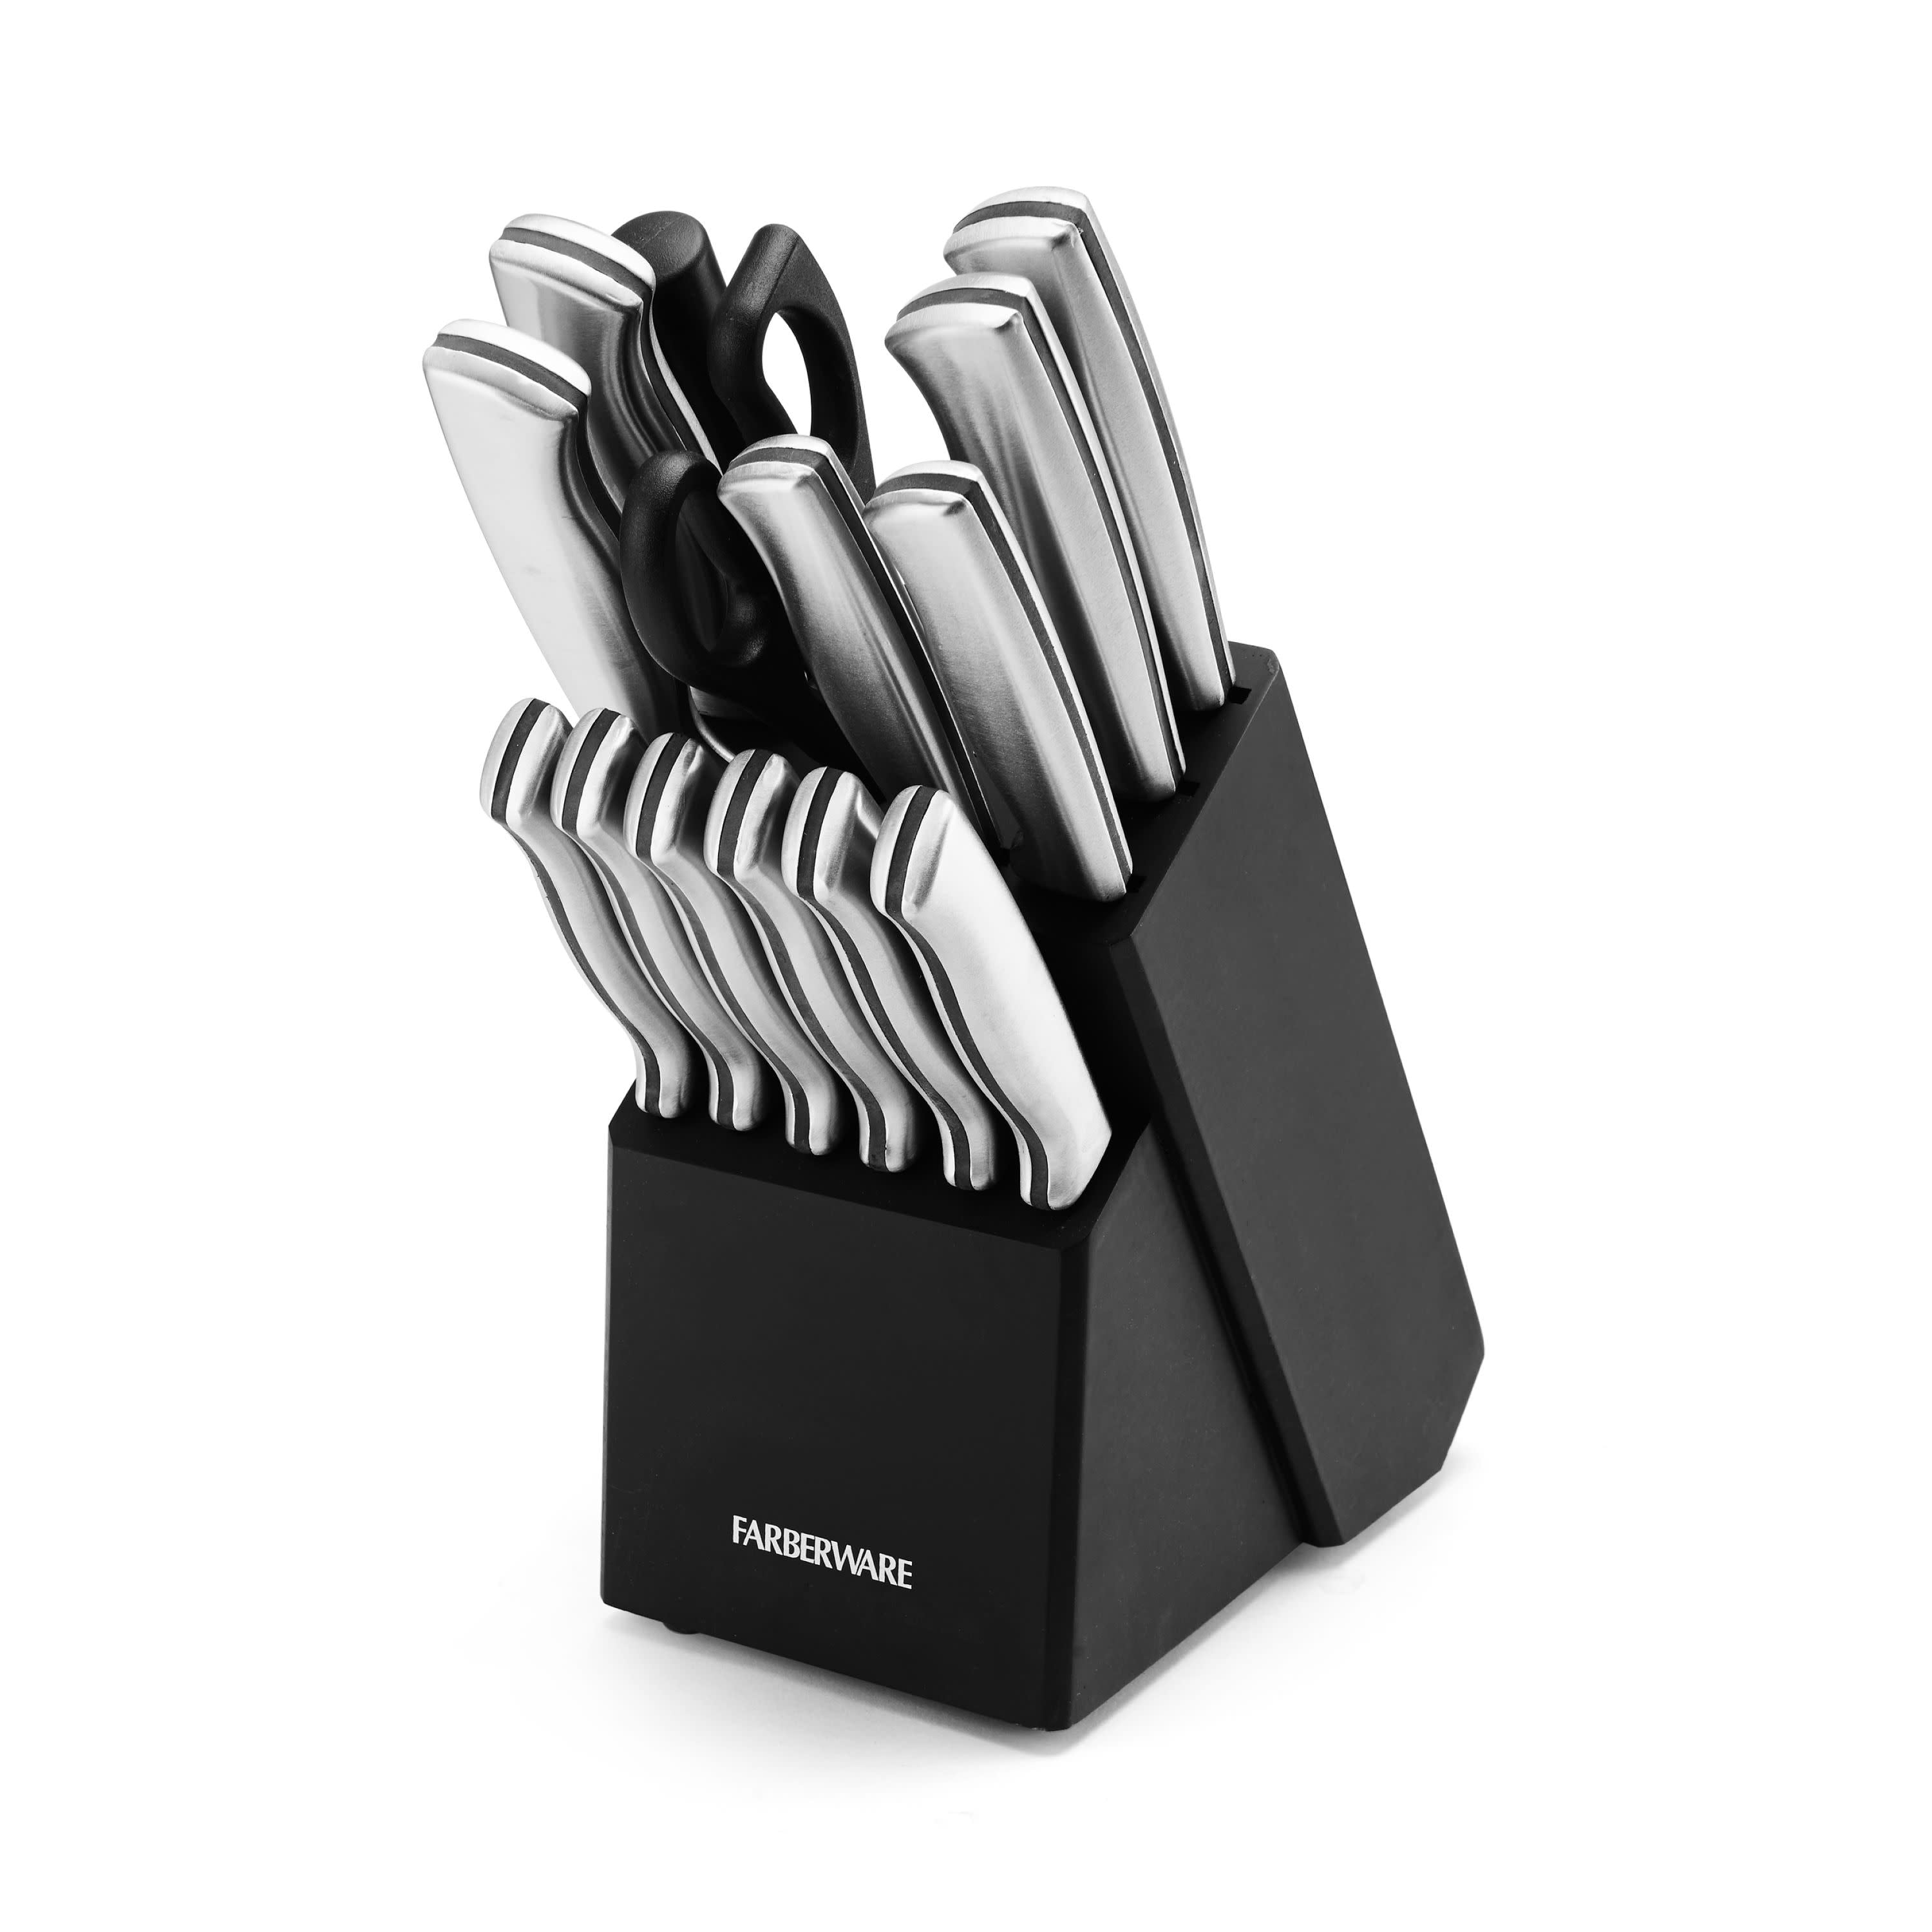 Farberware 15-Piece Cutlery Set-Stamped Stainless Steel - Walmart.com Farberware Stainless Steel Cutlery Set